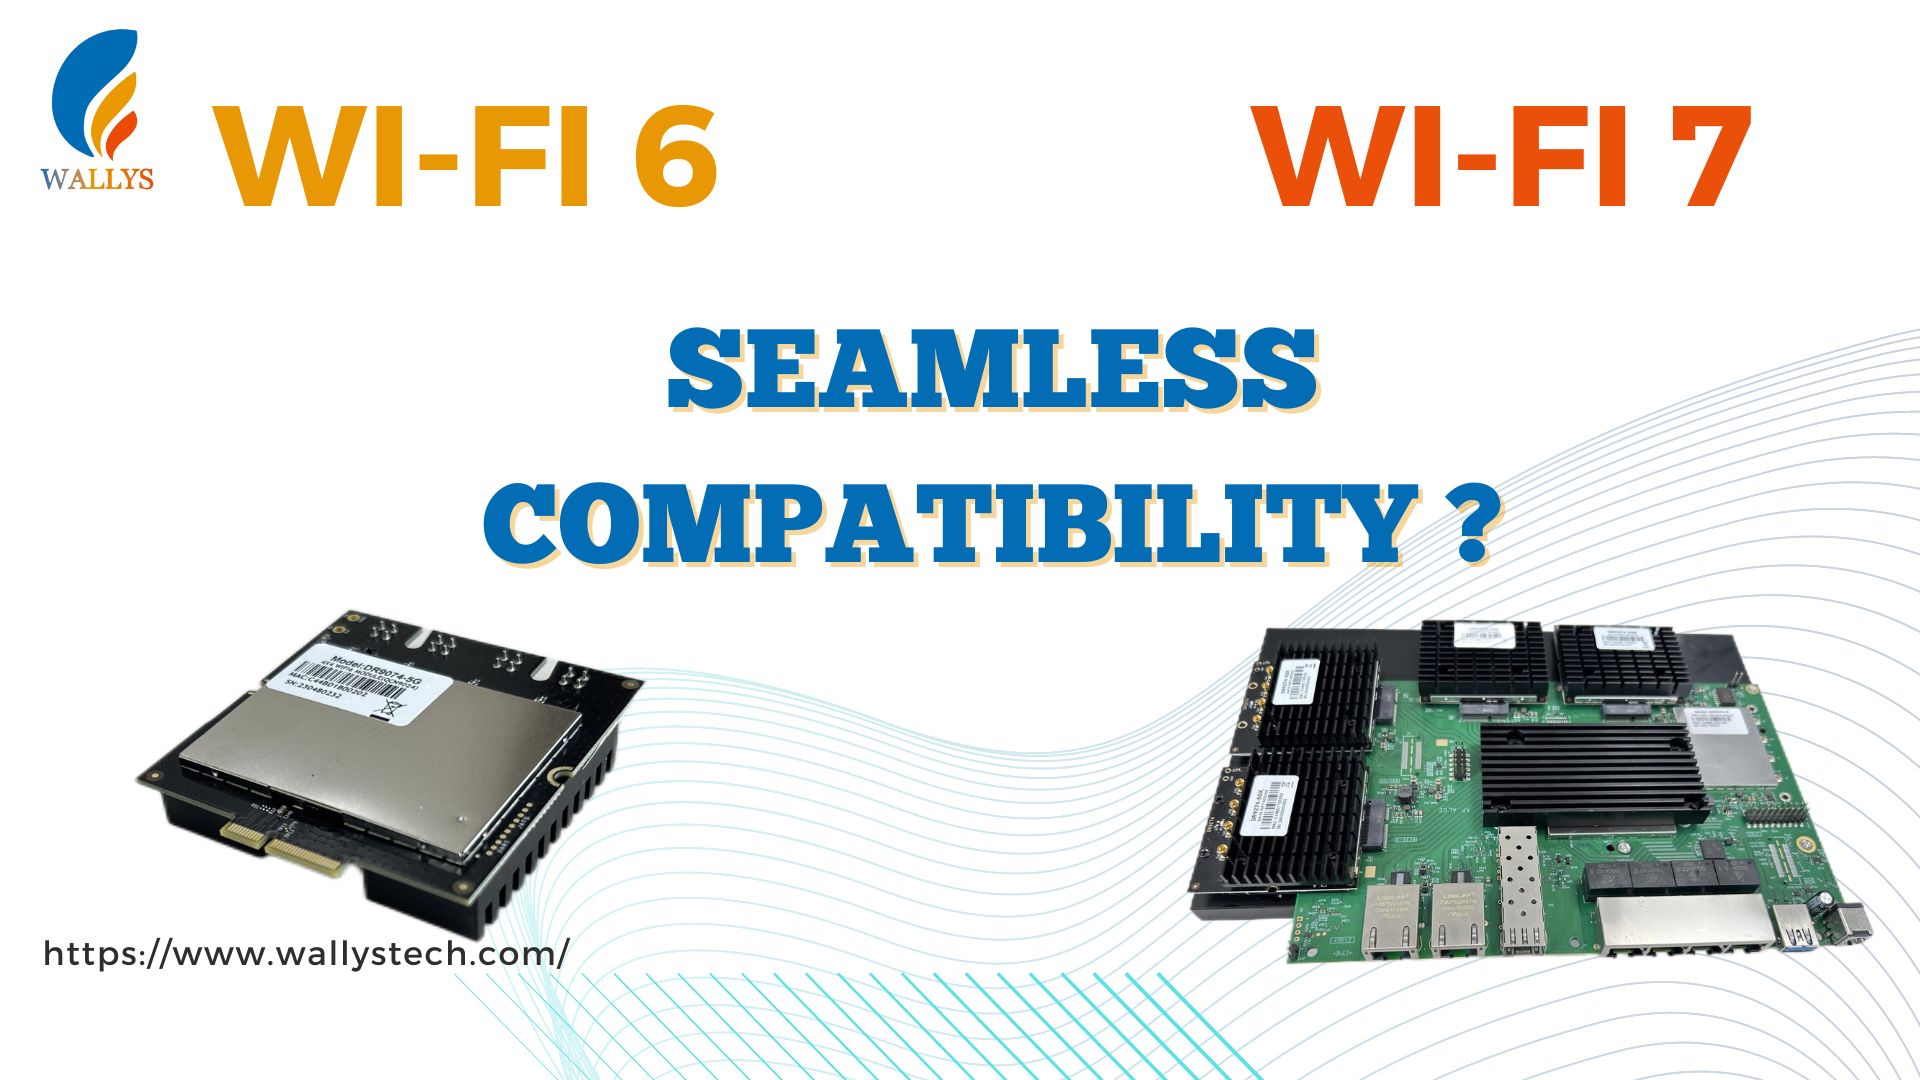 IPQ9574 vs. QCN9074 Does the WiFi7 Platform DR9574 Support WiFi6 Card DR9074?